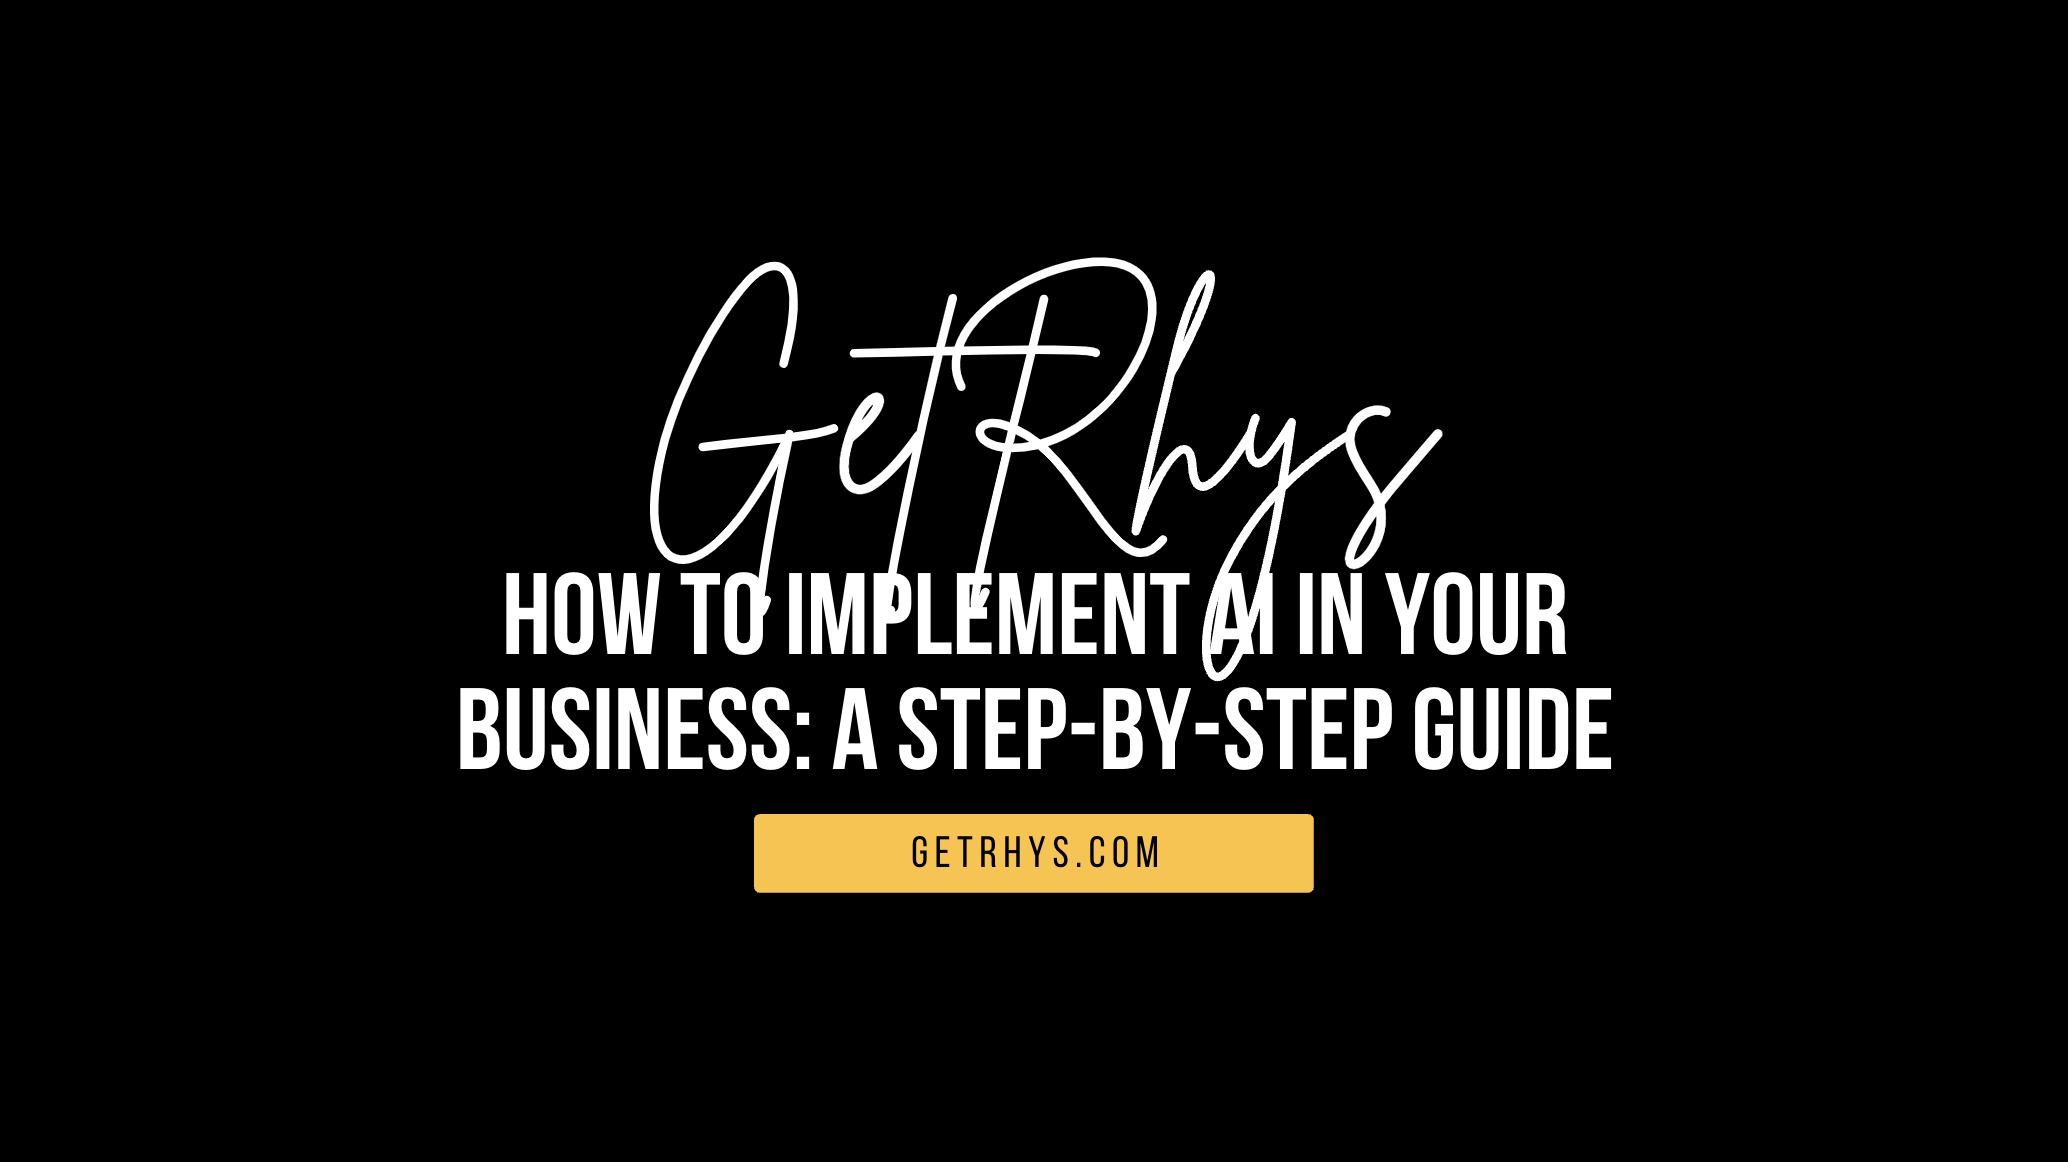 How to Implement AI in Your Business: A Step-by-Step Guide